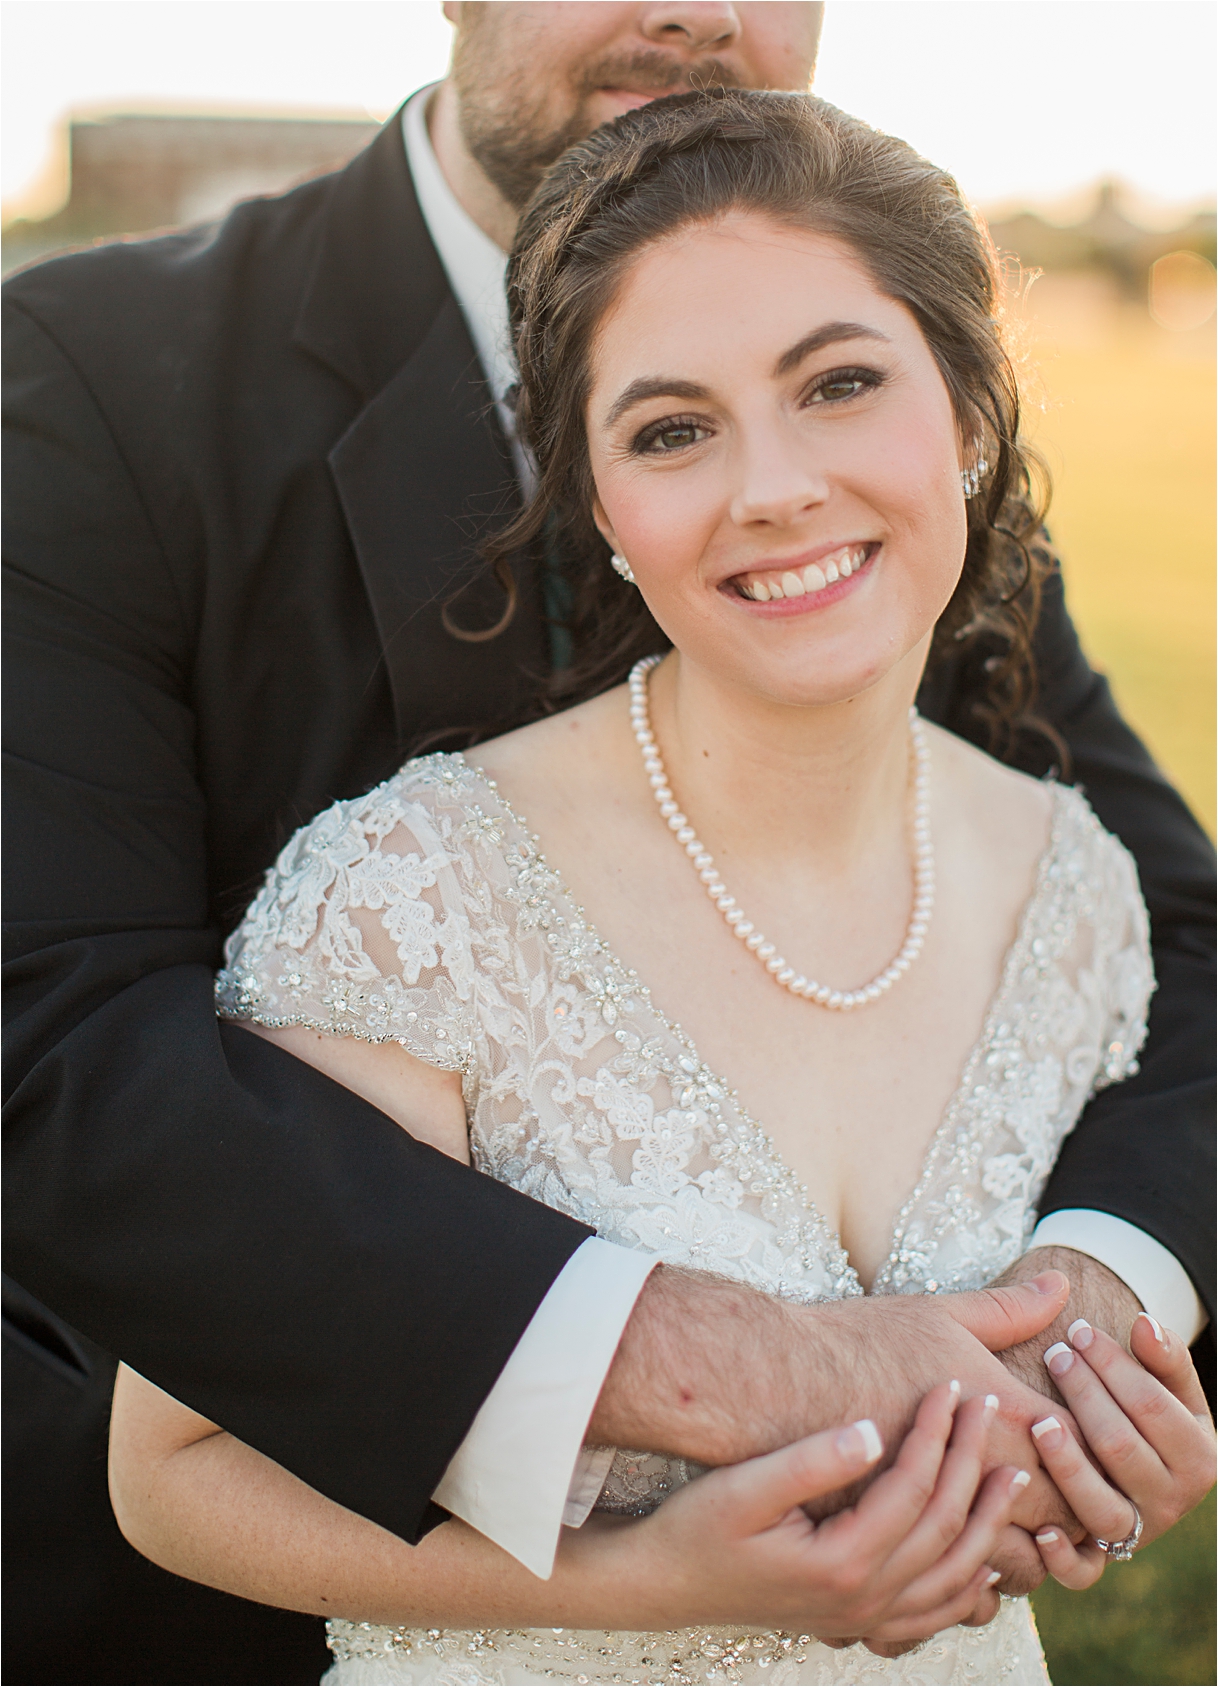 Bride and groom portraits at Tundra Lodge, Green Bay, Wisconsin.